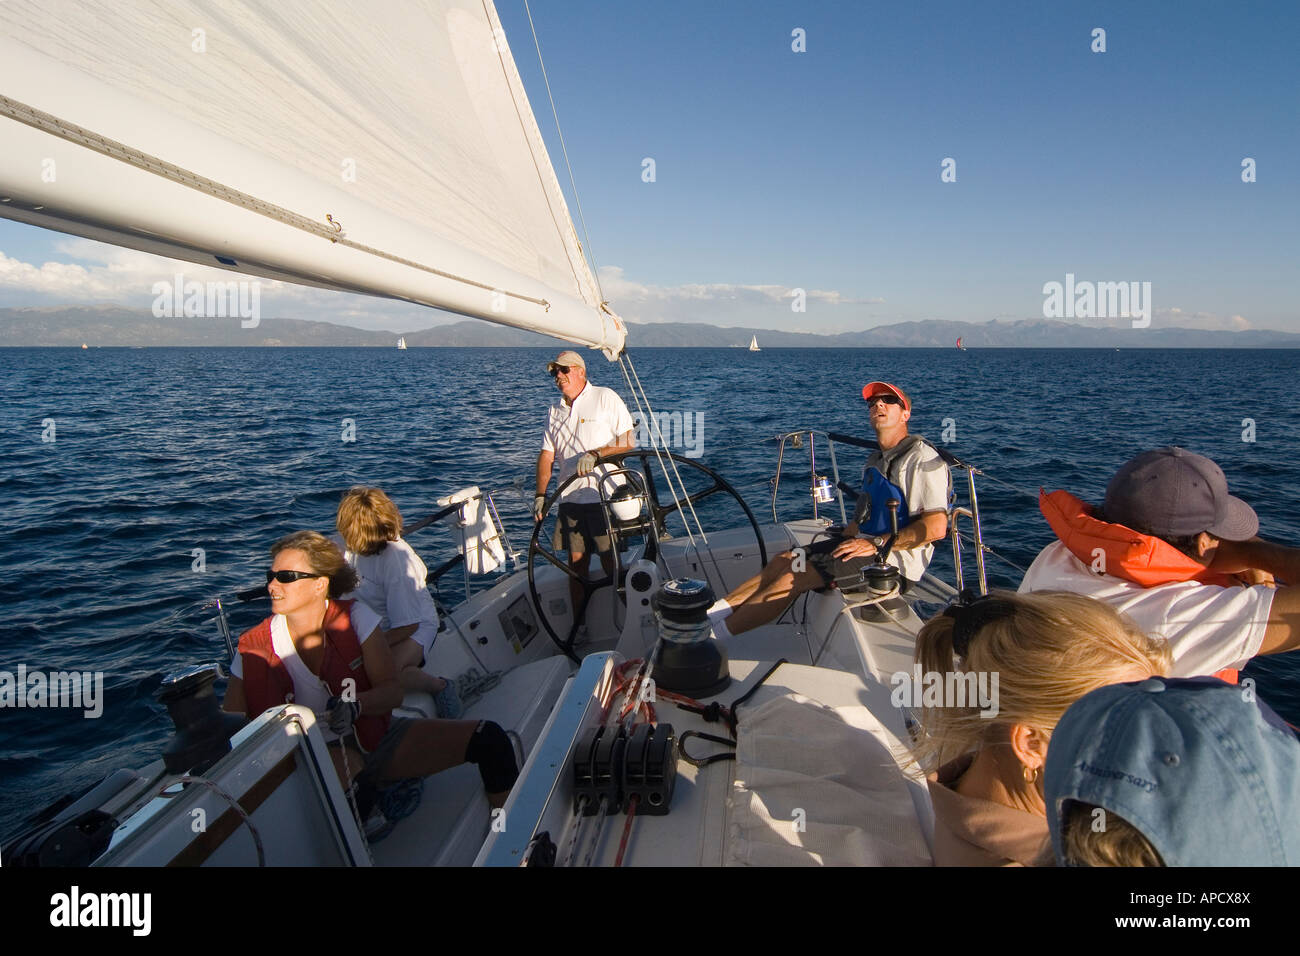 A crew on a sailboat during a race on Lake Tahoe in California Stock Photo